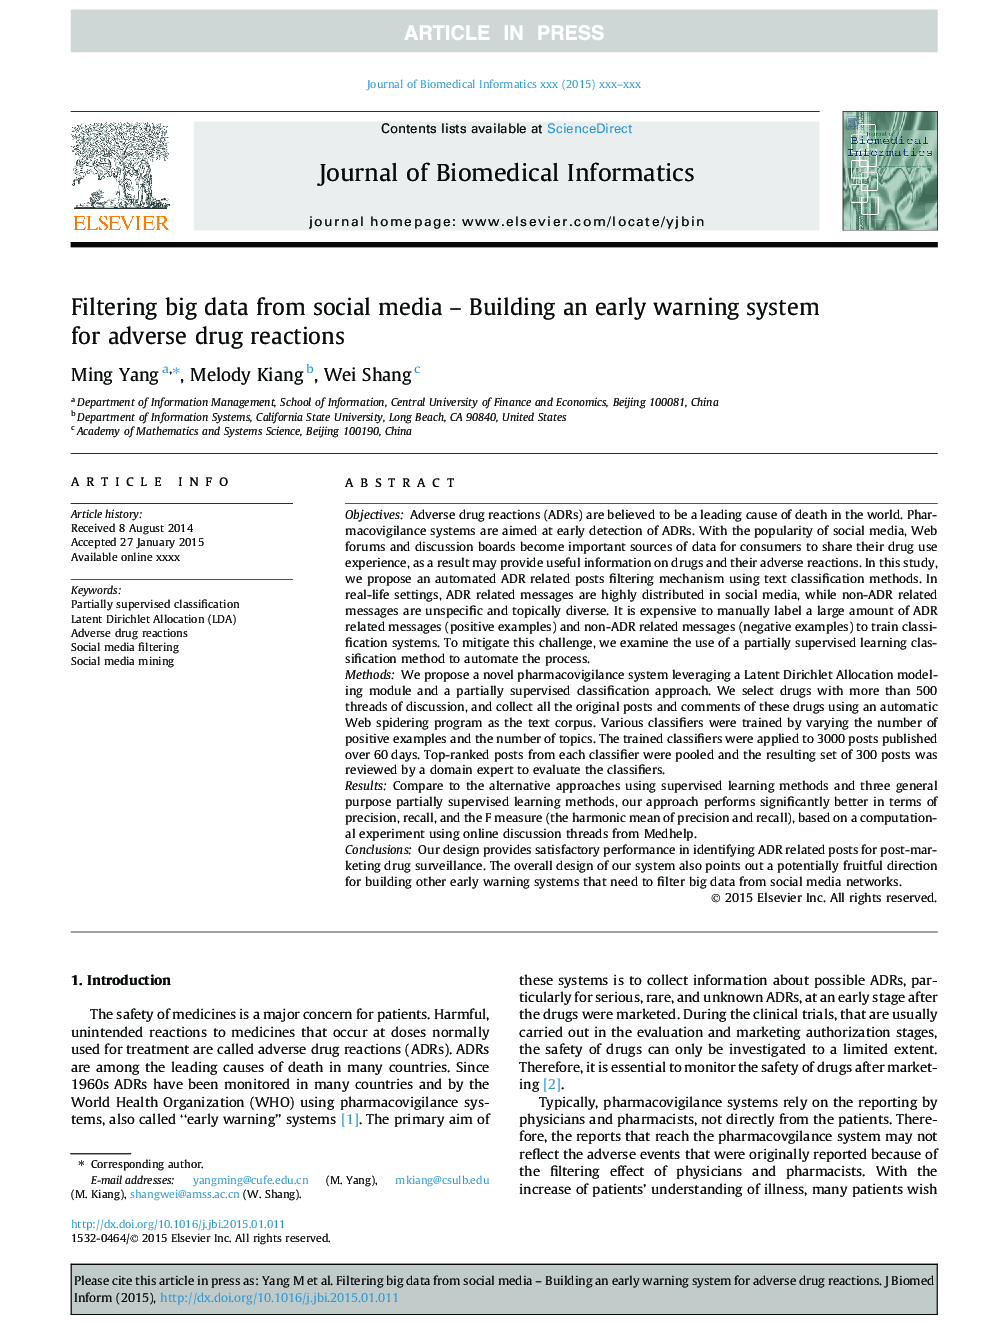 Filtering big data from social media - Building an early warning system for adverse drug reactions